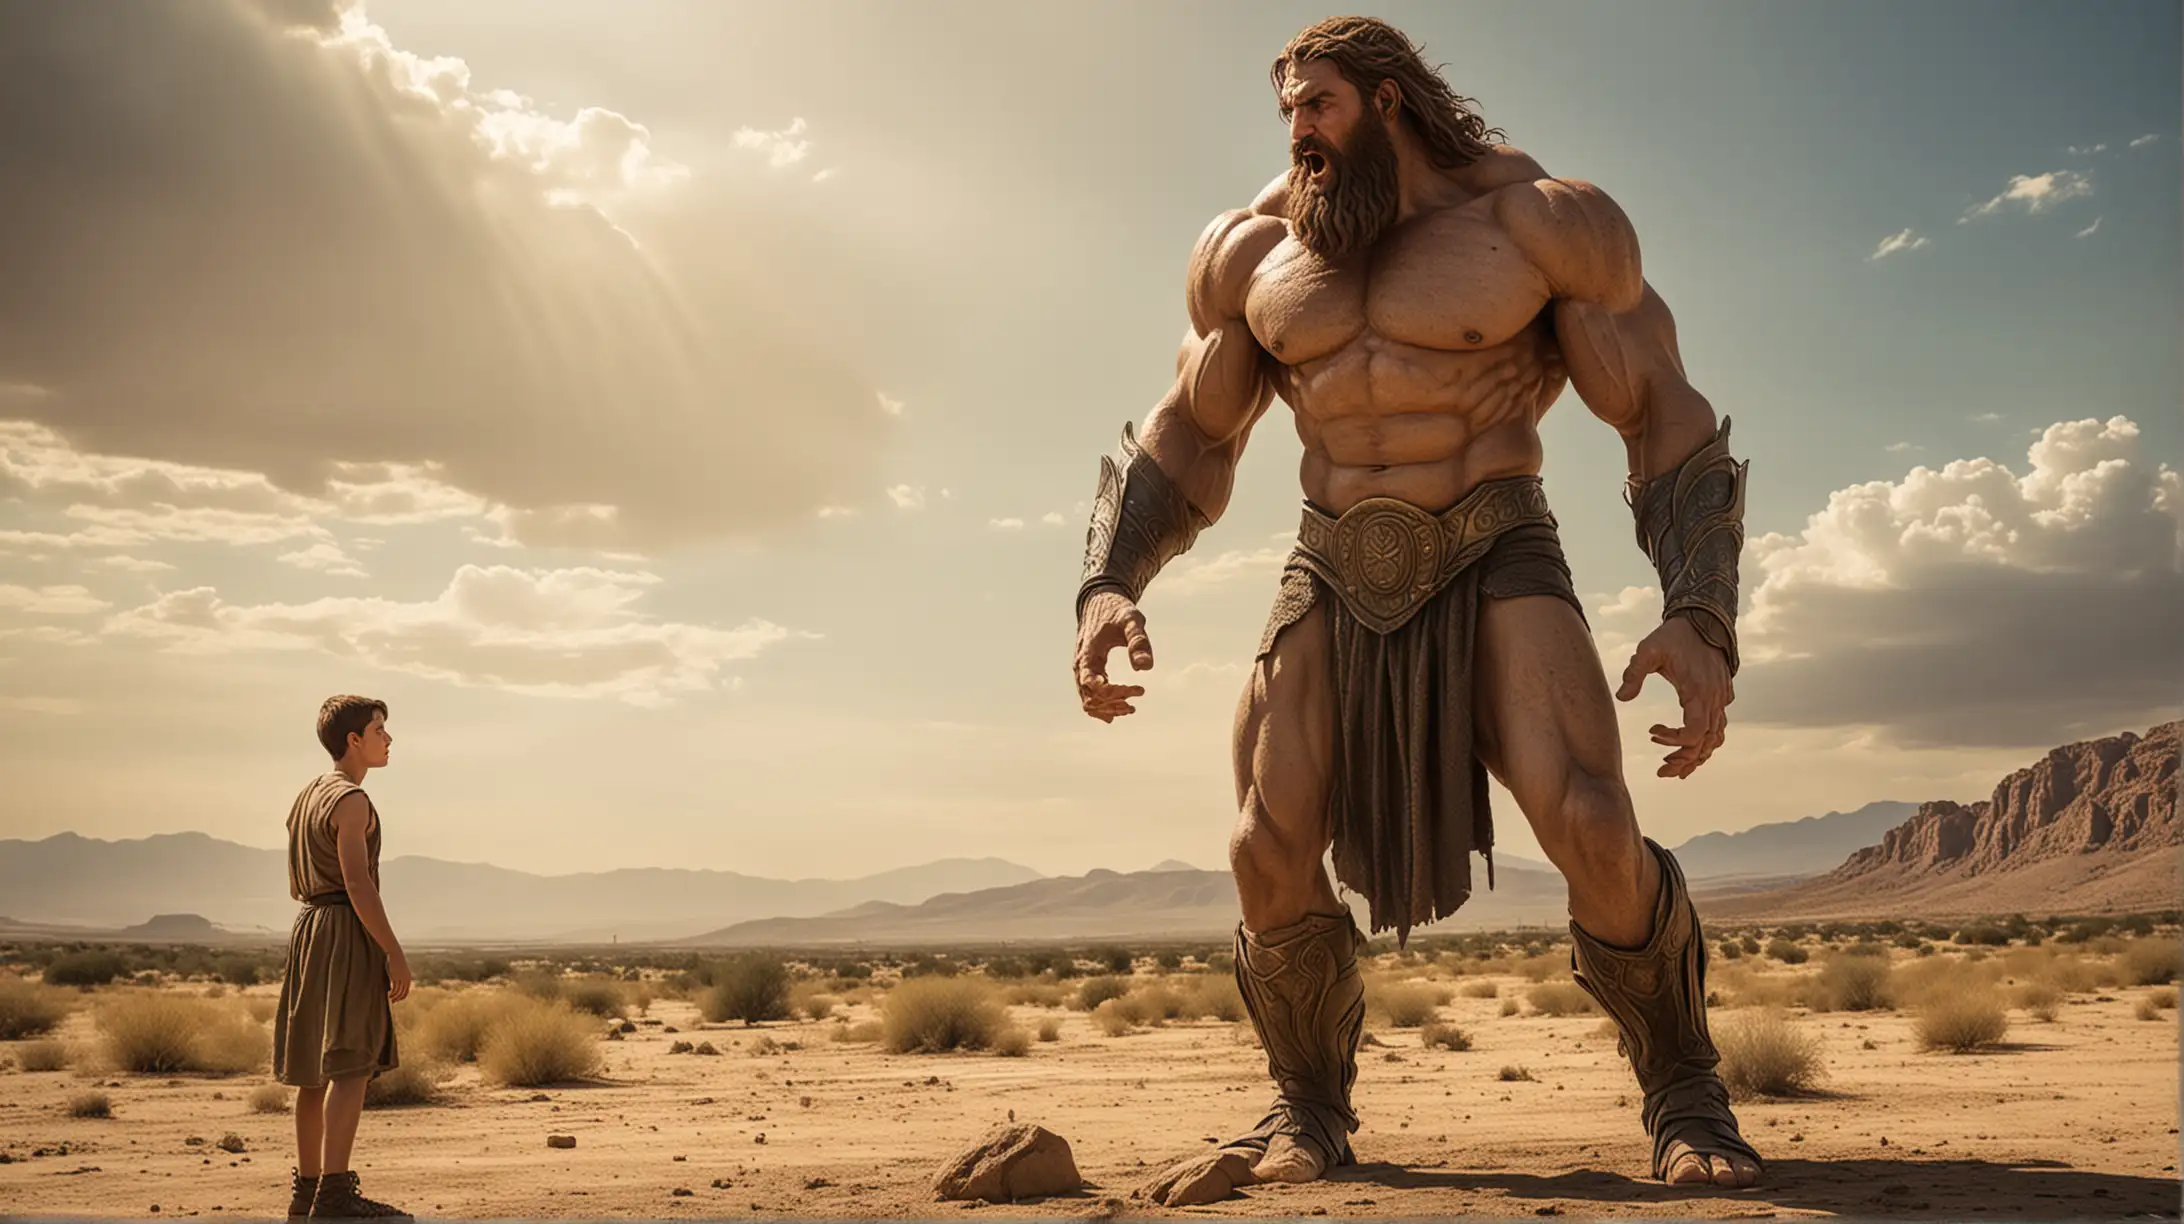 Biblical Giant Goliath Confronted by Brave Young Man in Desert Fields